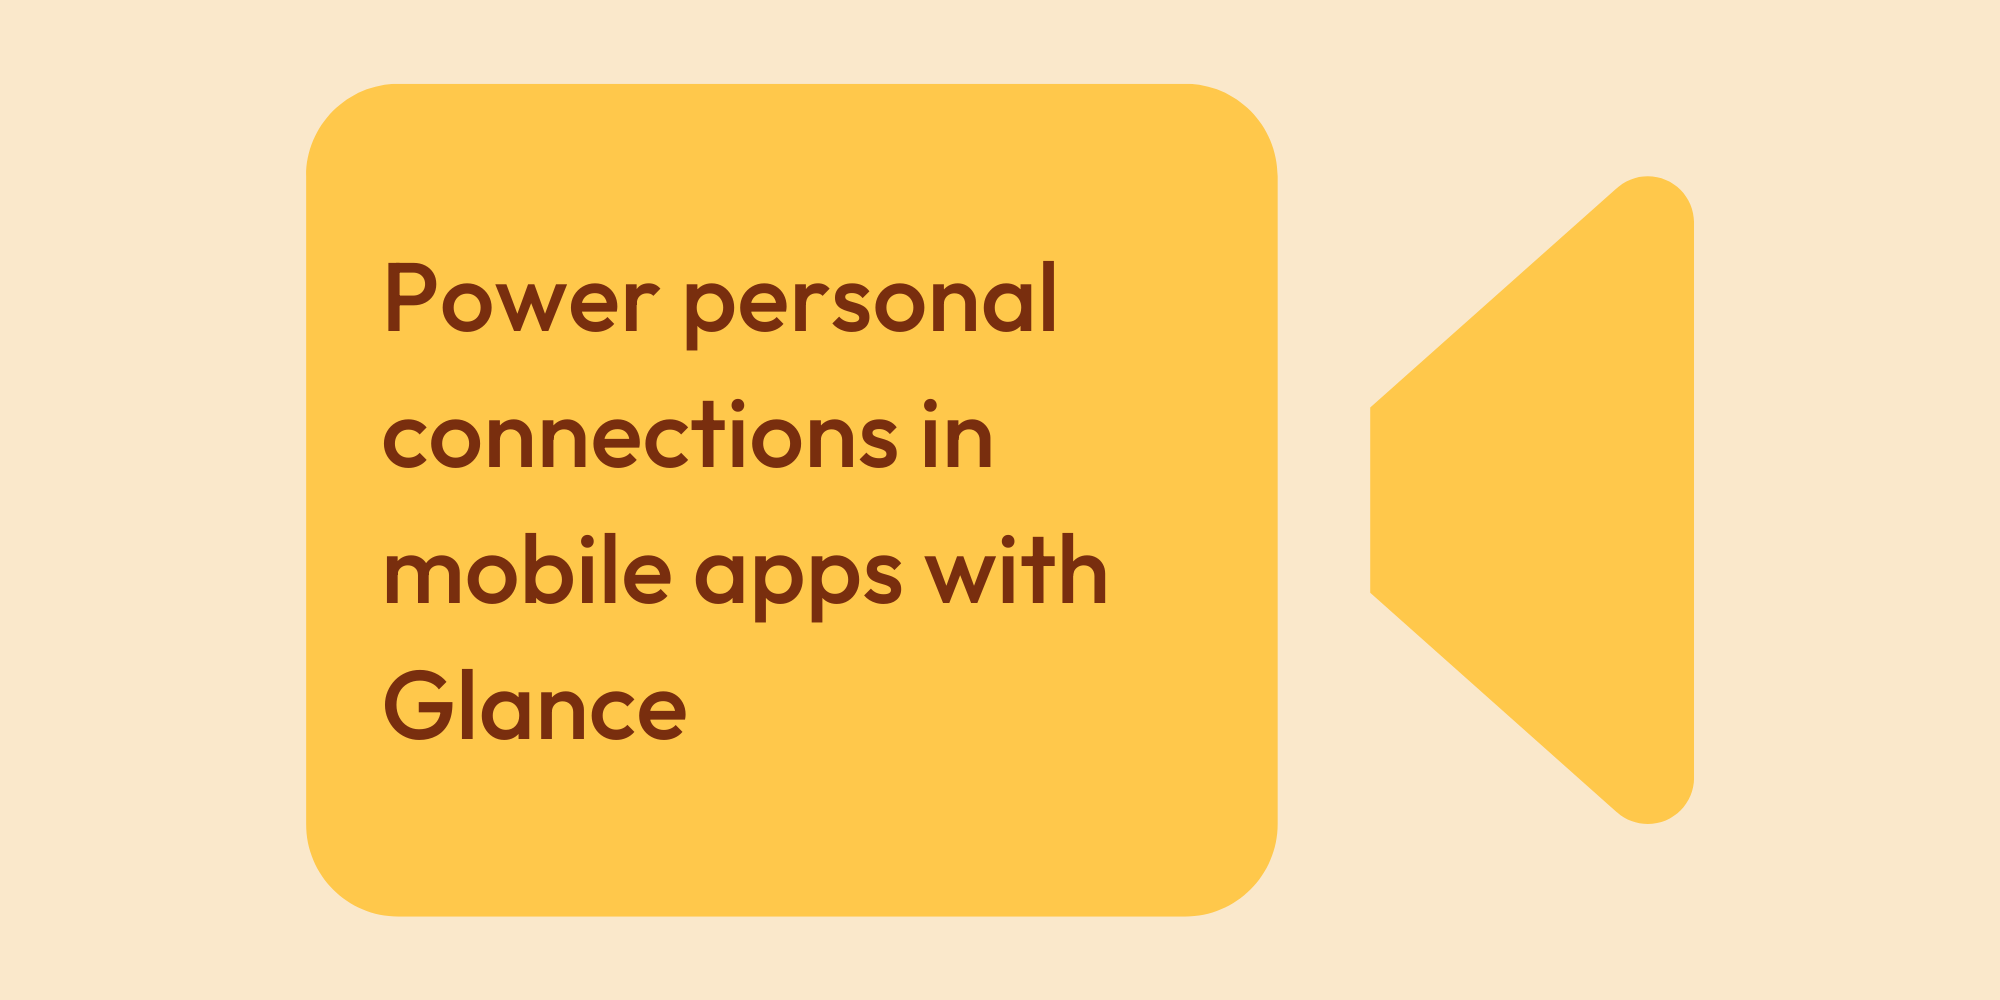 Power personal connections in mobile apps with Glance